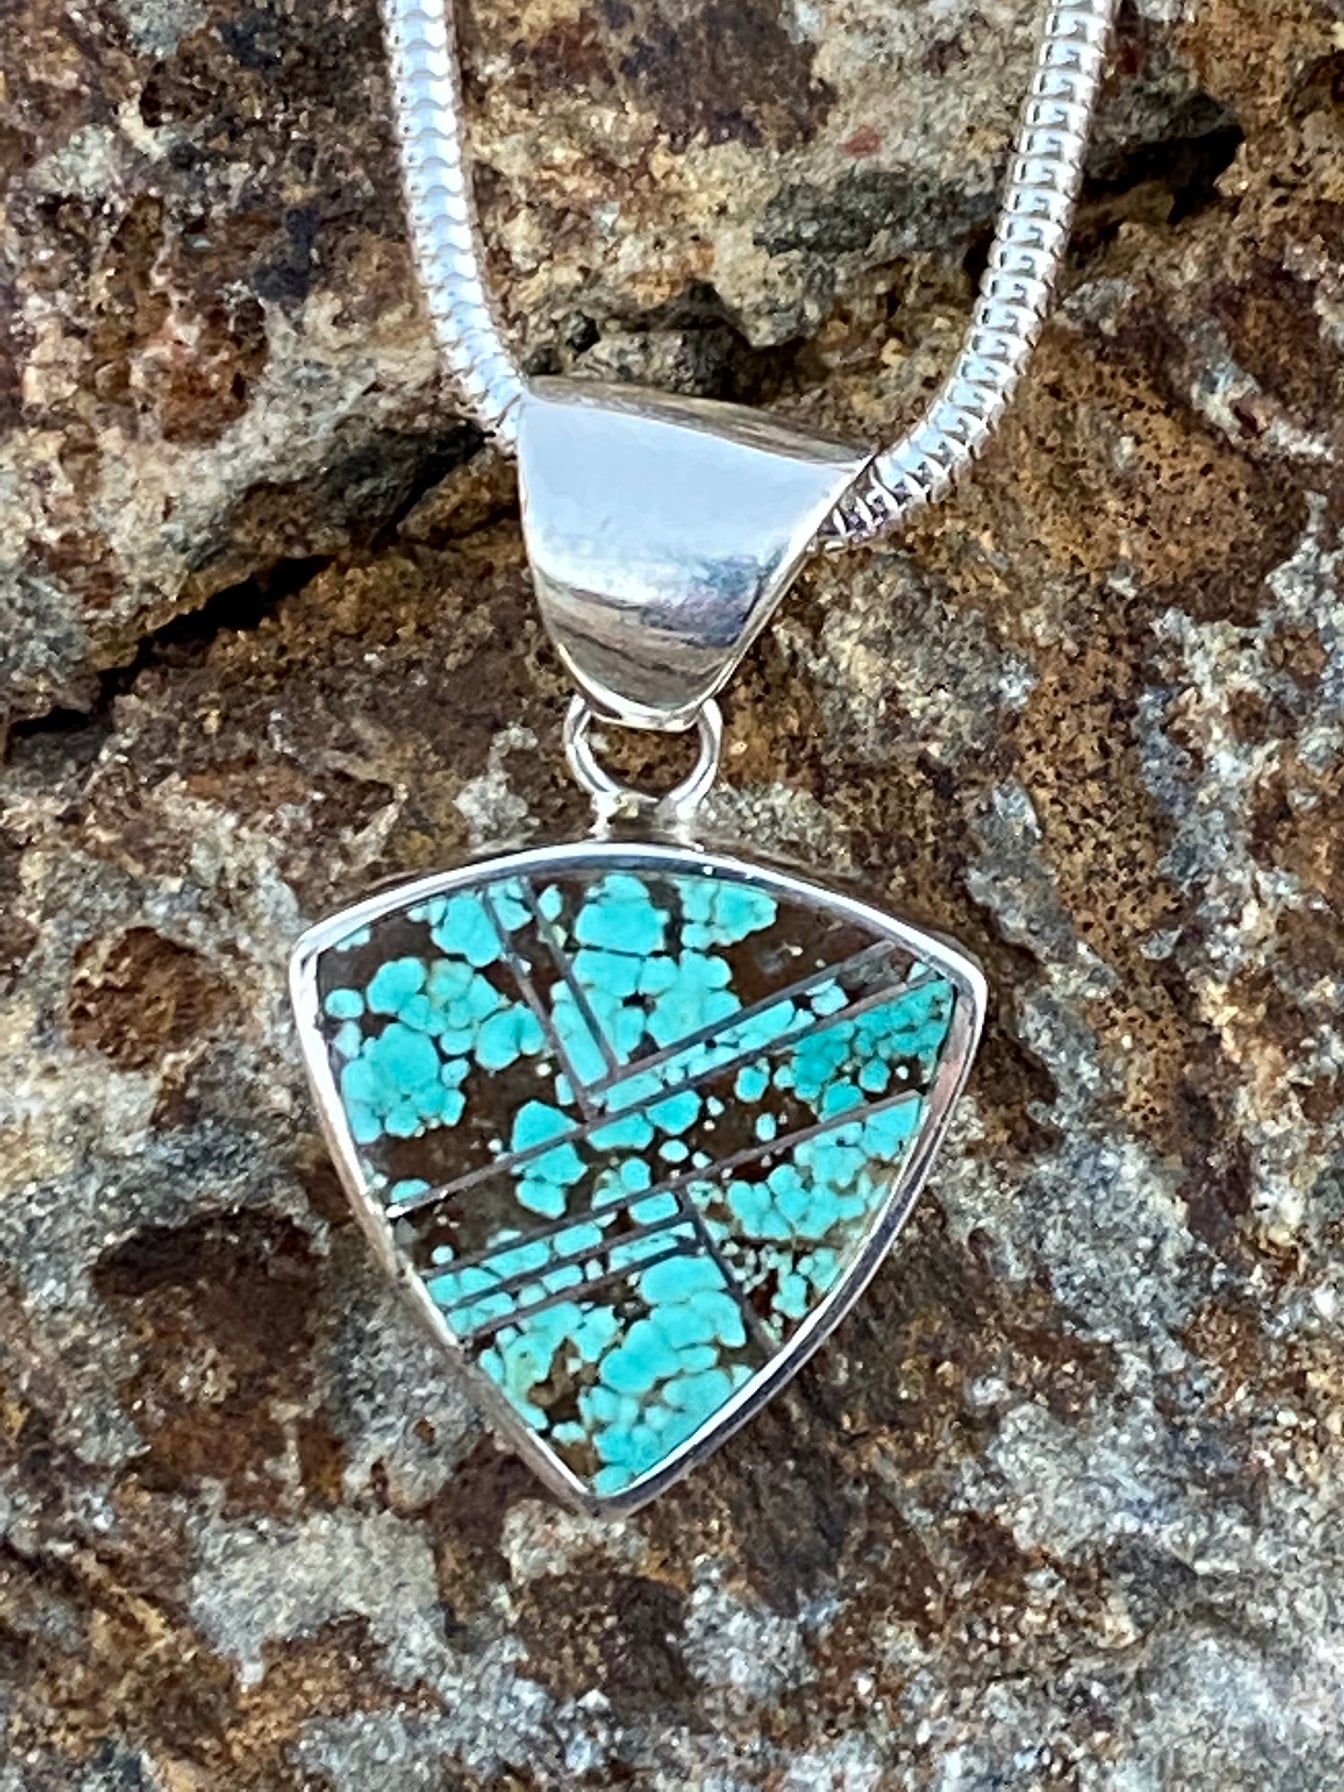 Spider Web Turquoise #8 Triangle Pendant & Sterling Silver Chain